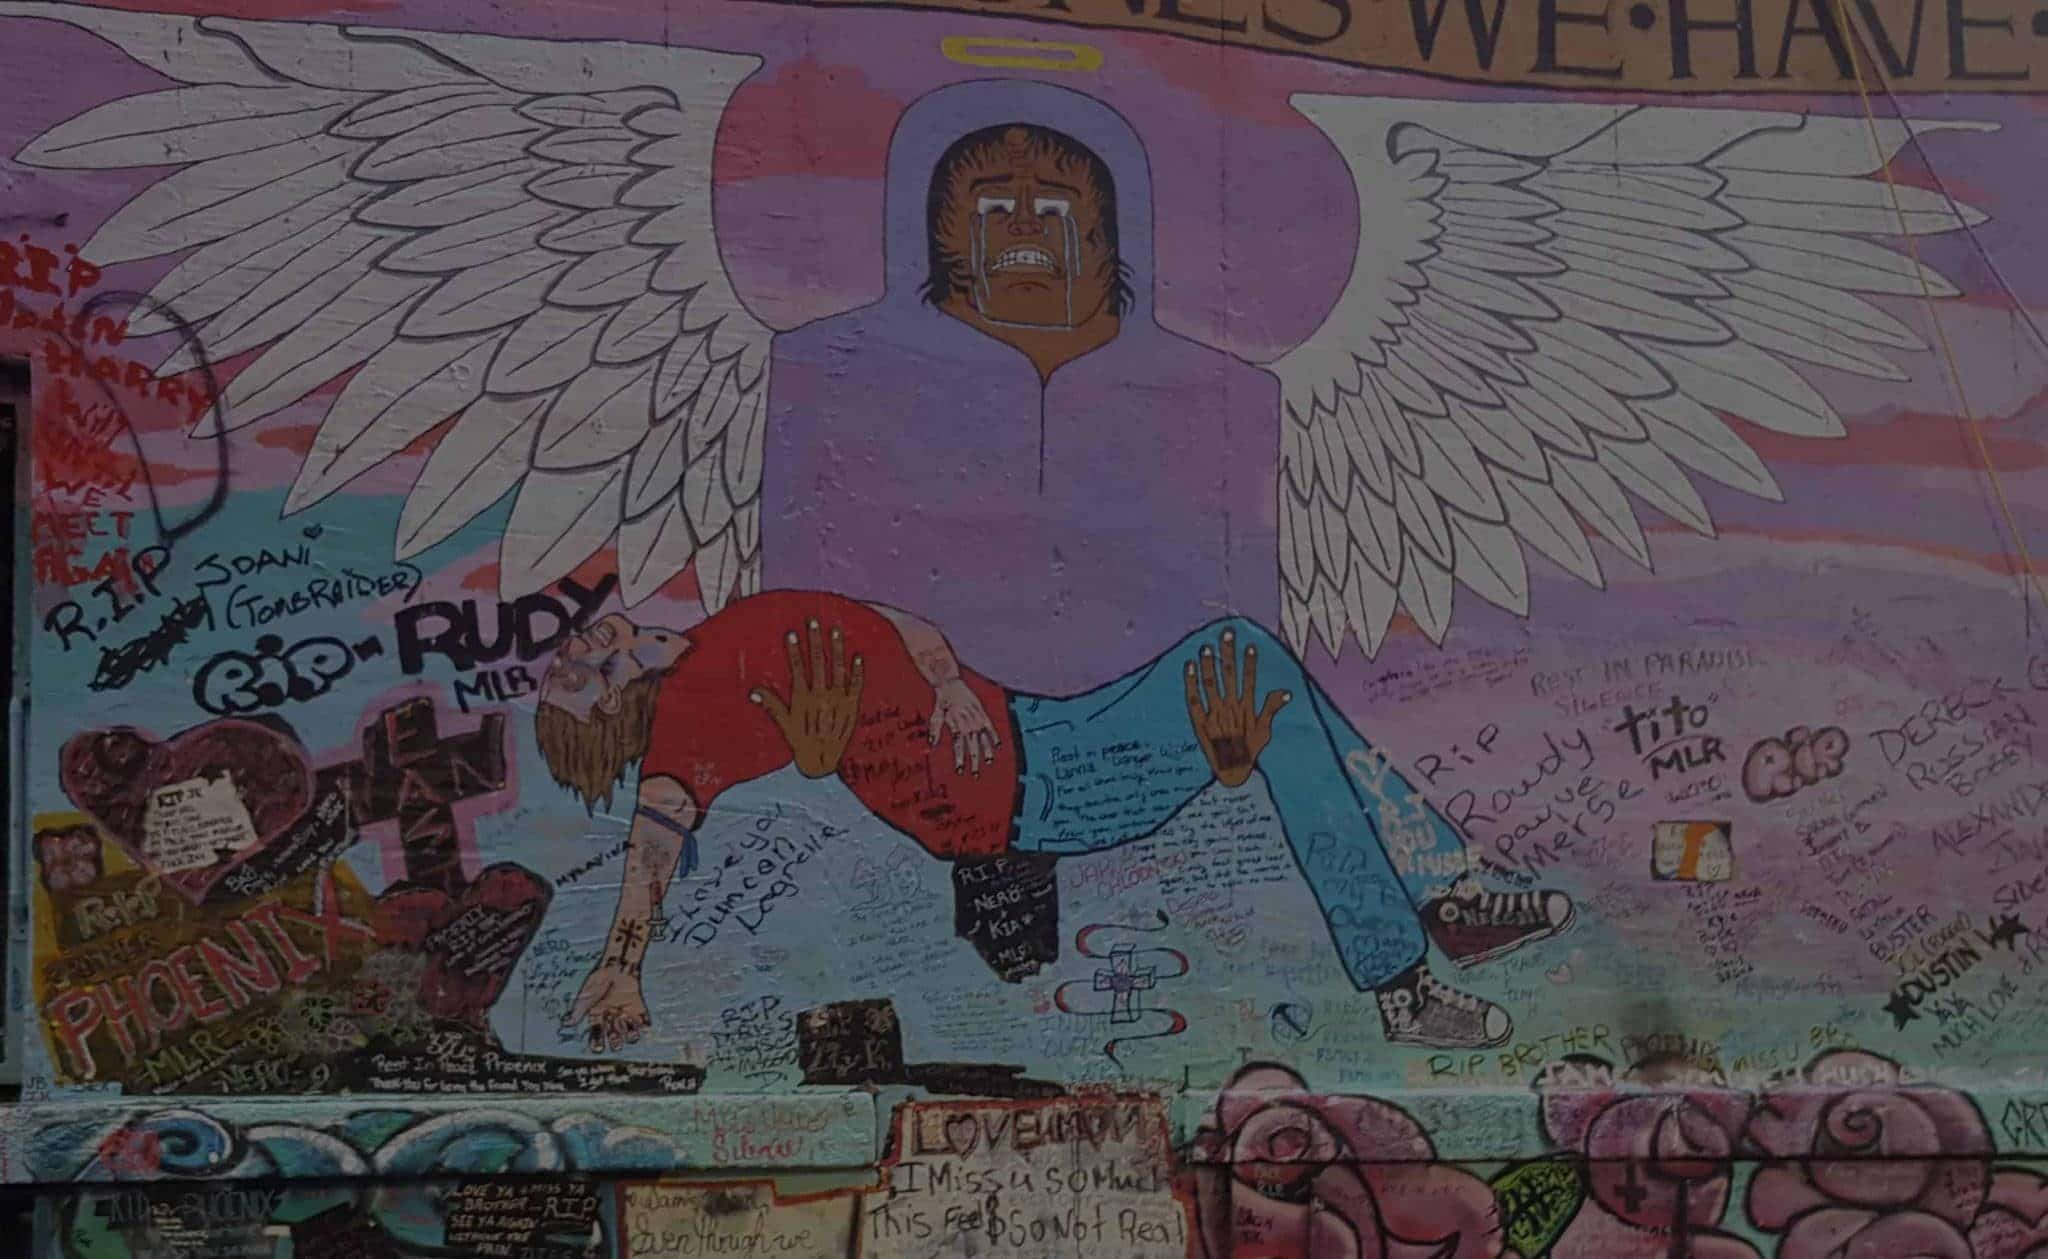 A painted mural of an angel lifting a deceased person up